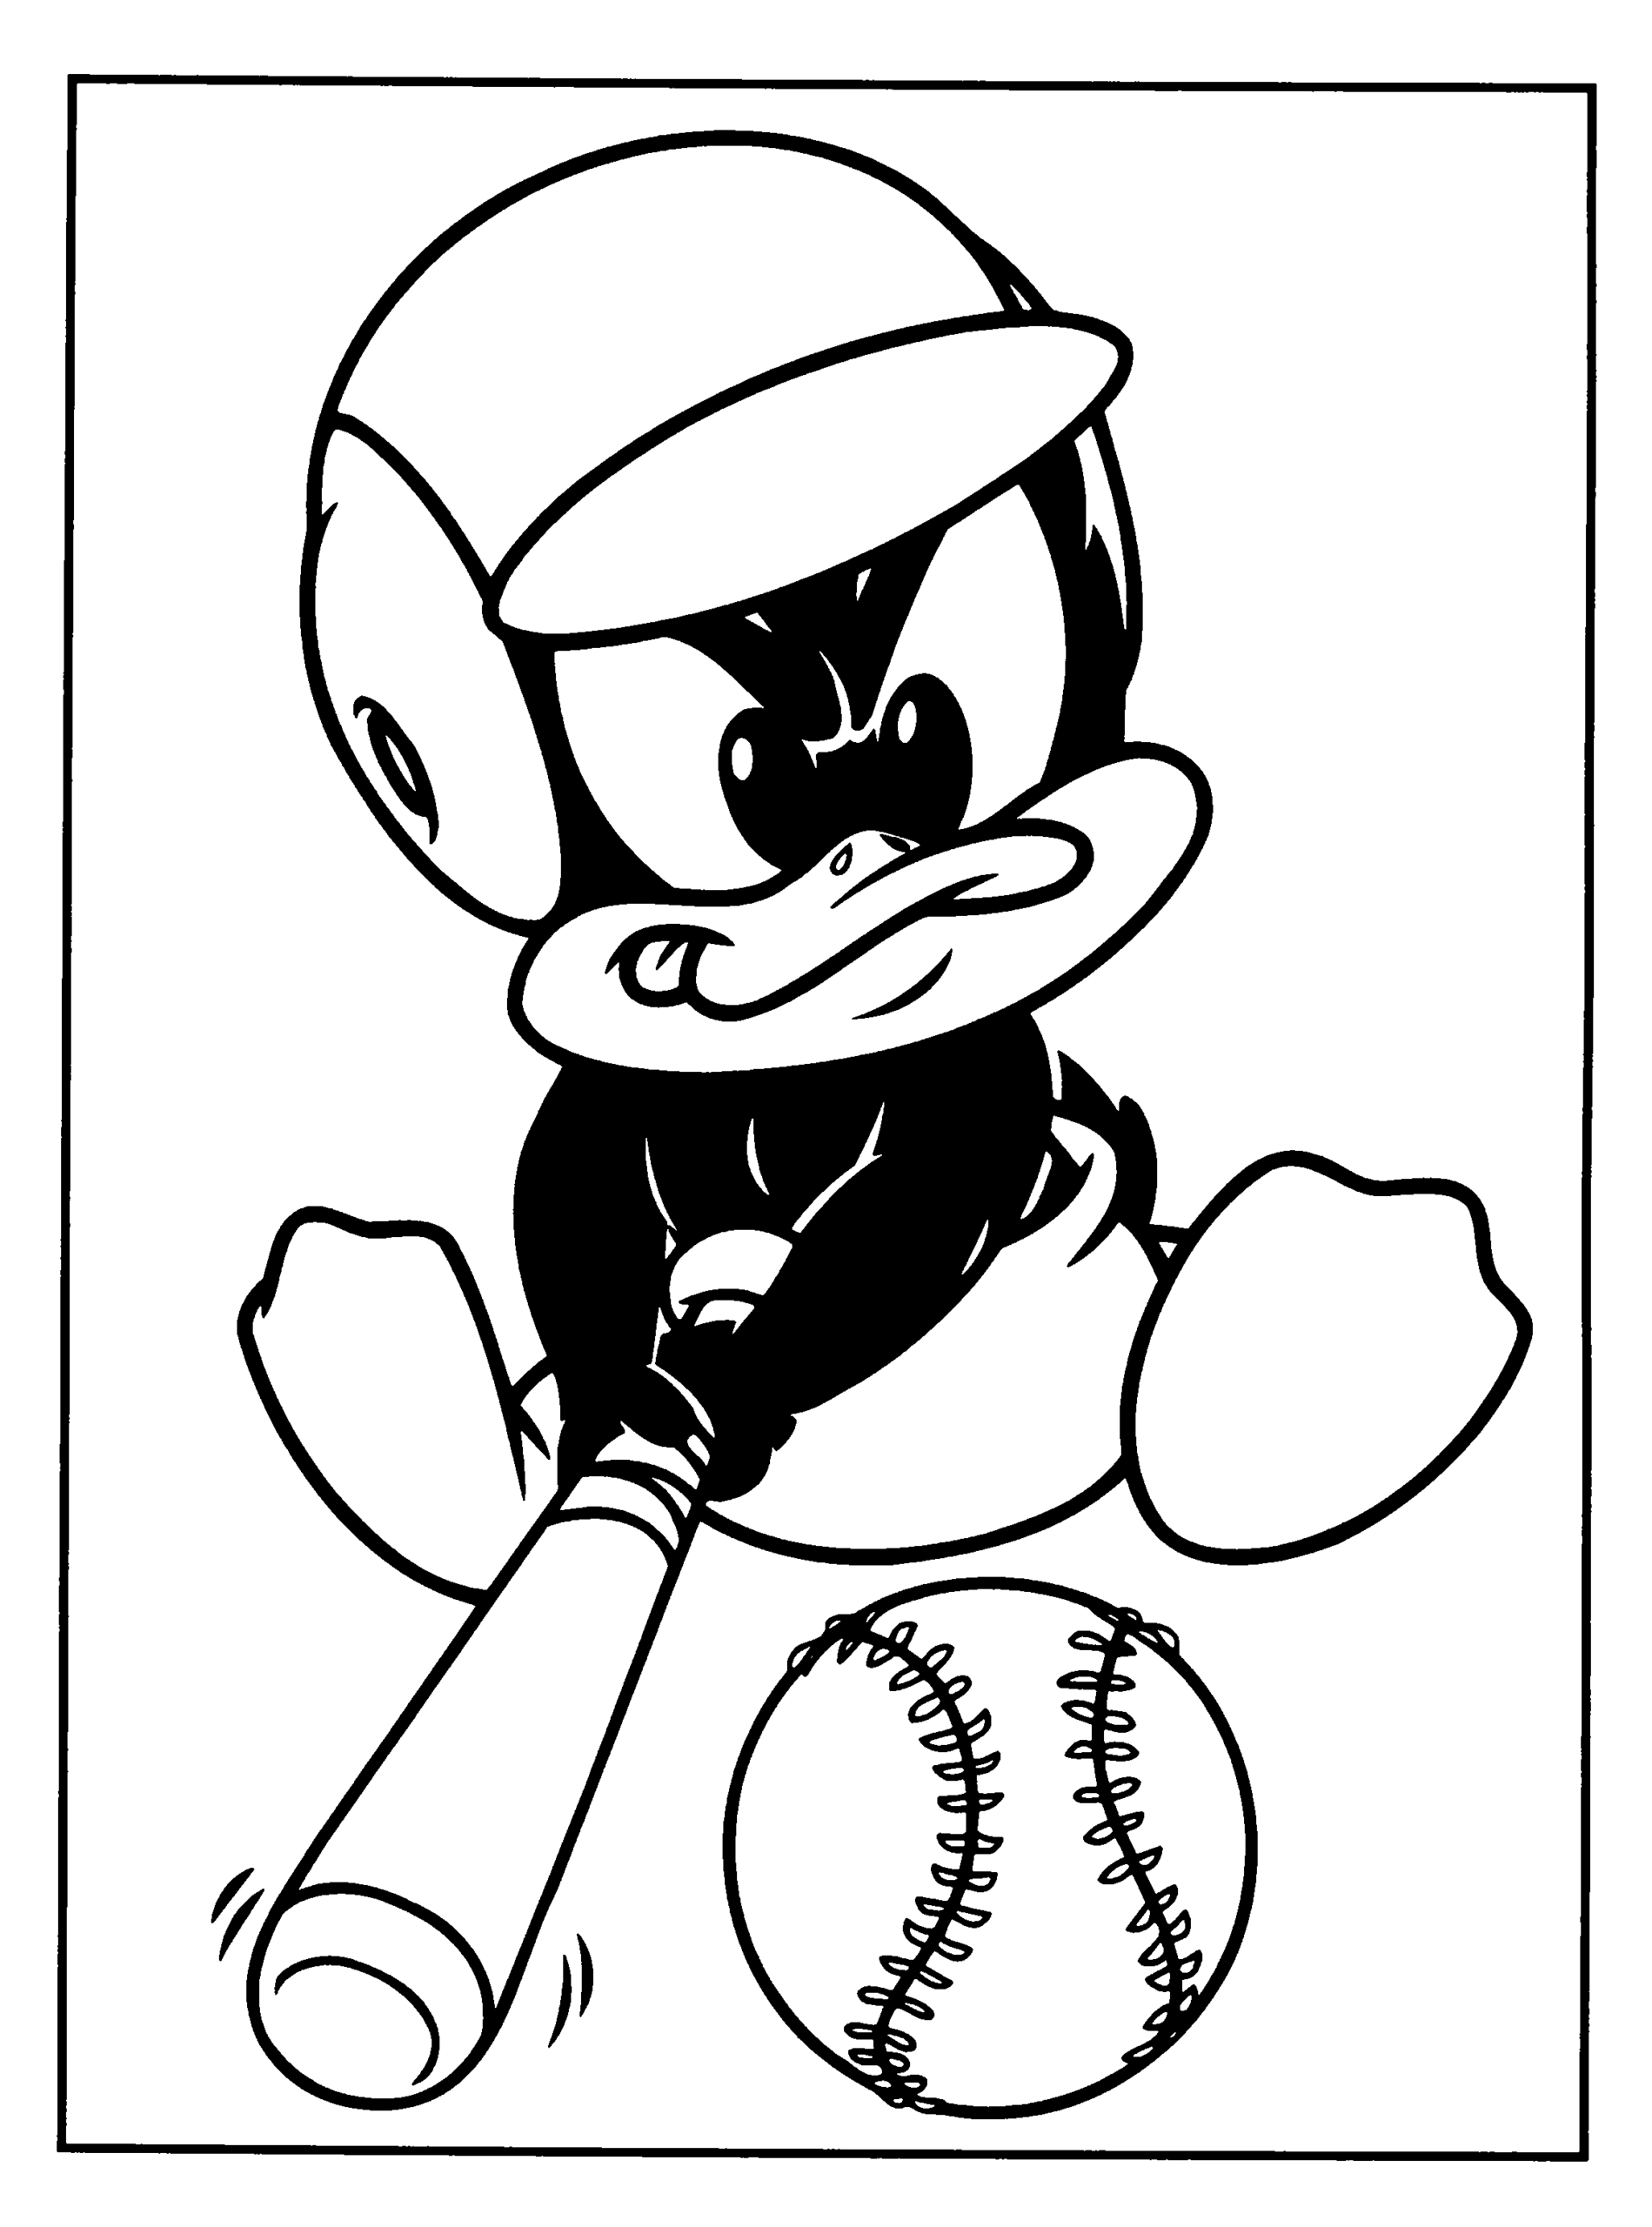 Looney Tunes Coloring Pages TV Film looney tunes dxCU9 Printable 2020 04569 Coloring4free